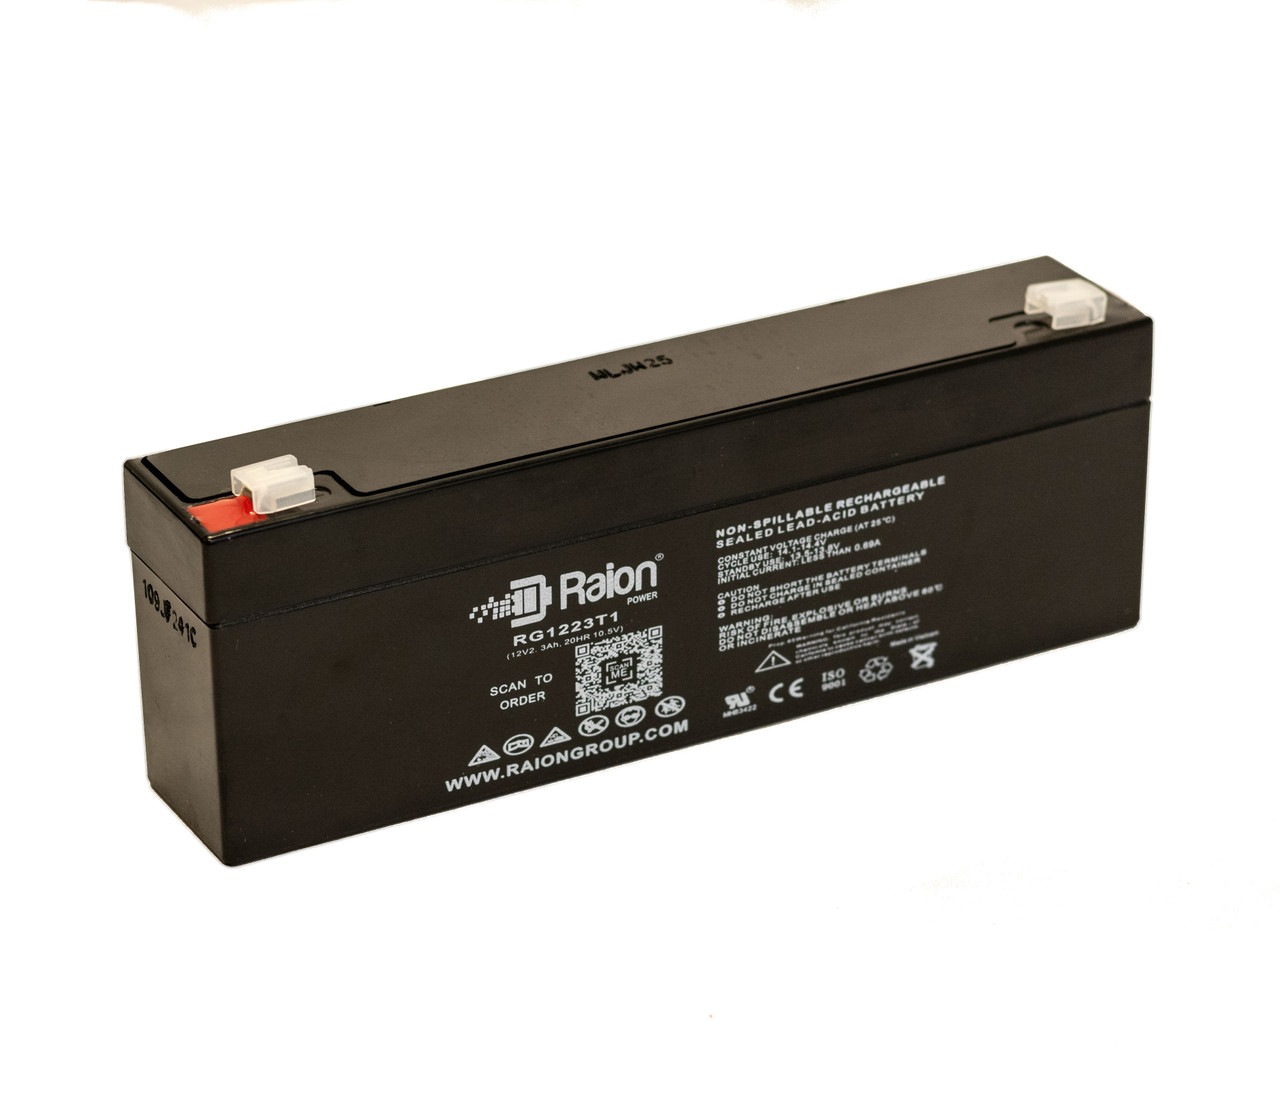 Raion Power RG1223T1 Replacement Battery for GS Portalac PE12V1.8